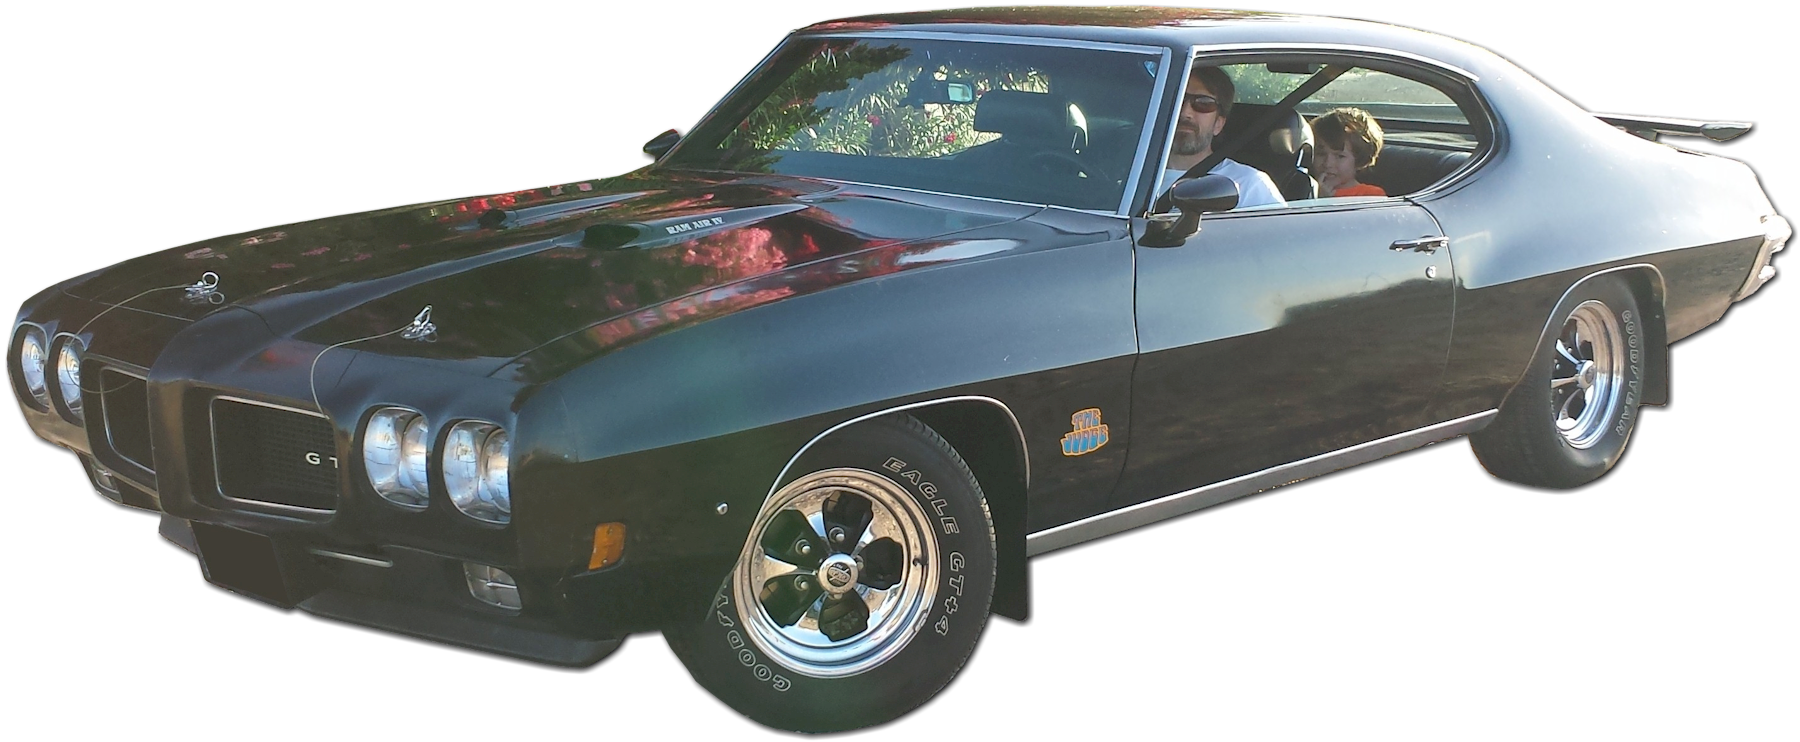 the1970gto.com gets The Judge decals back